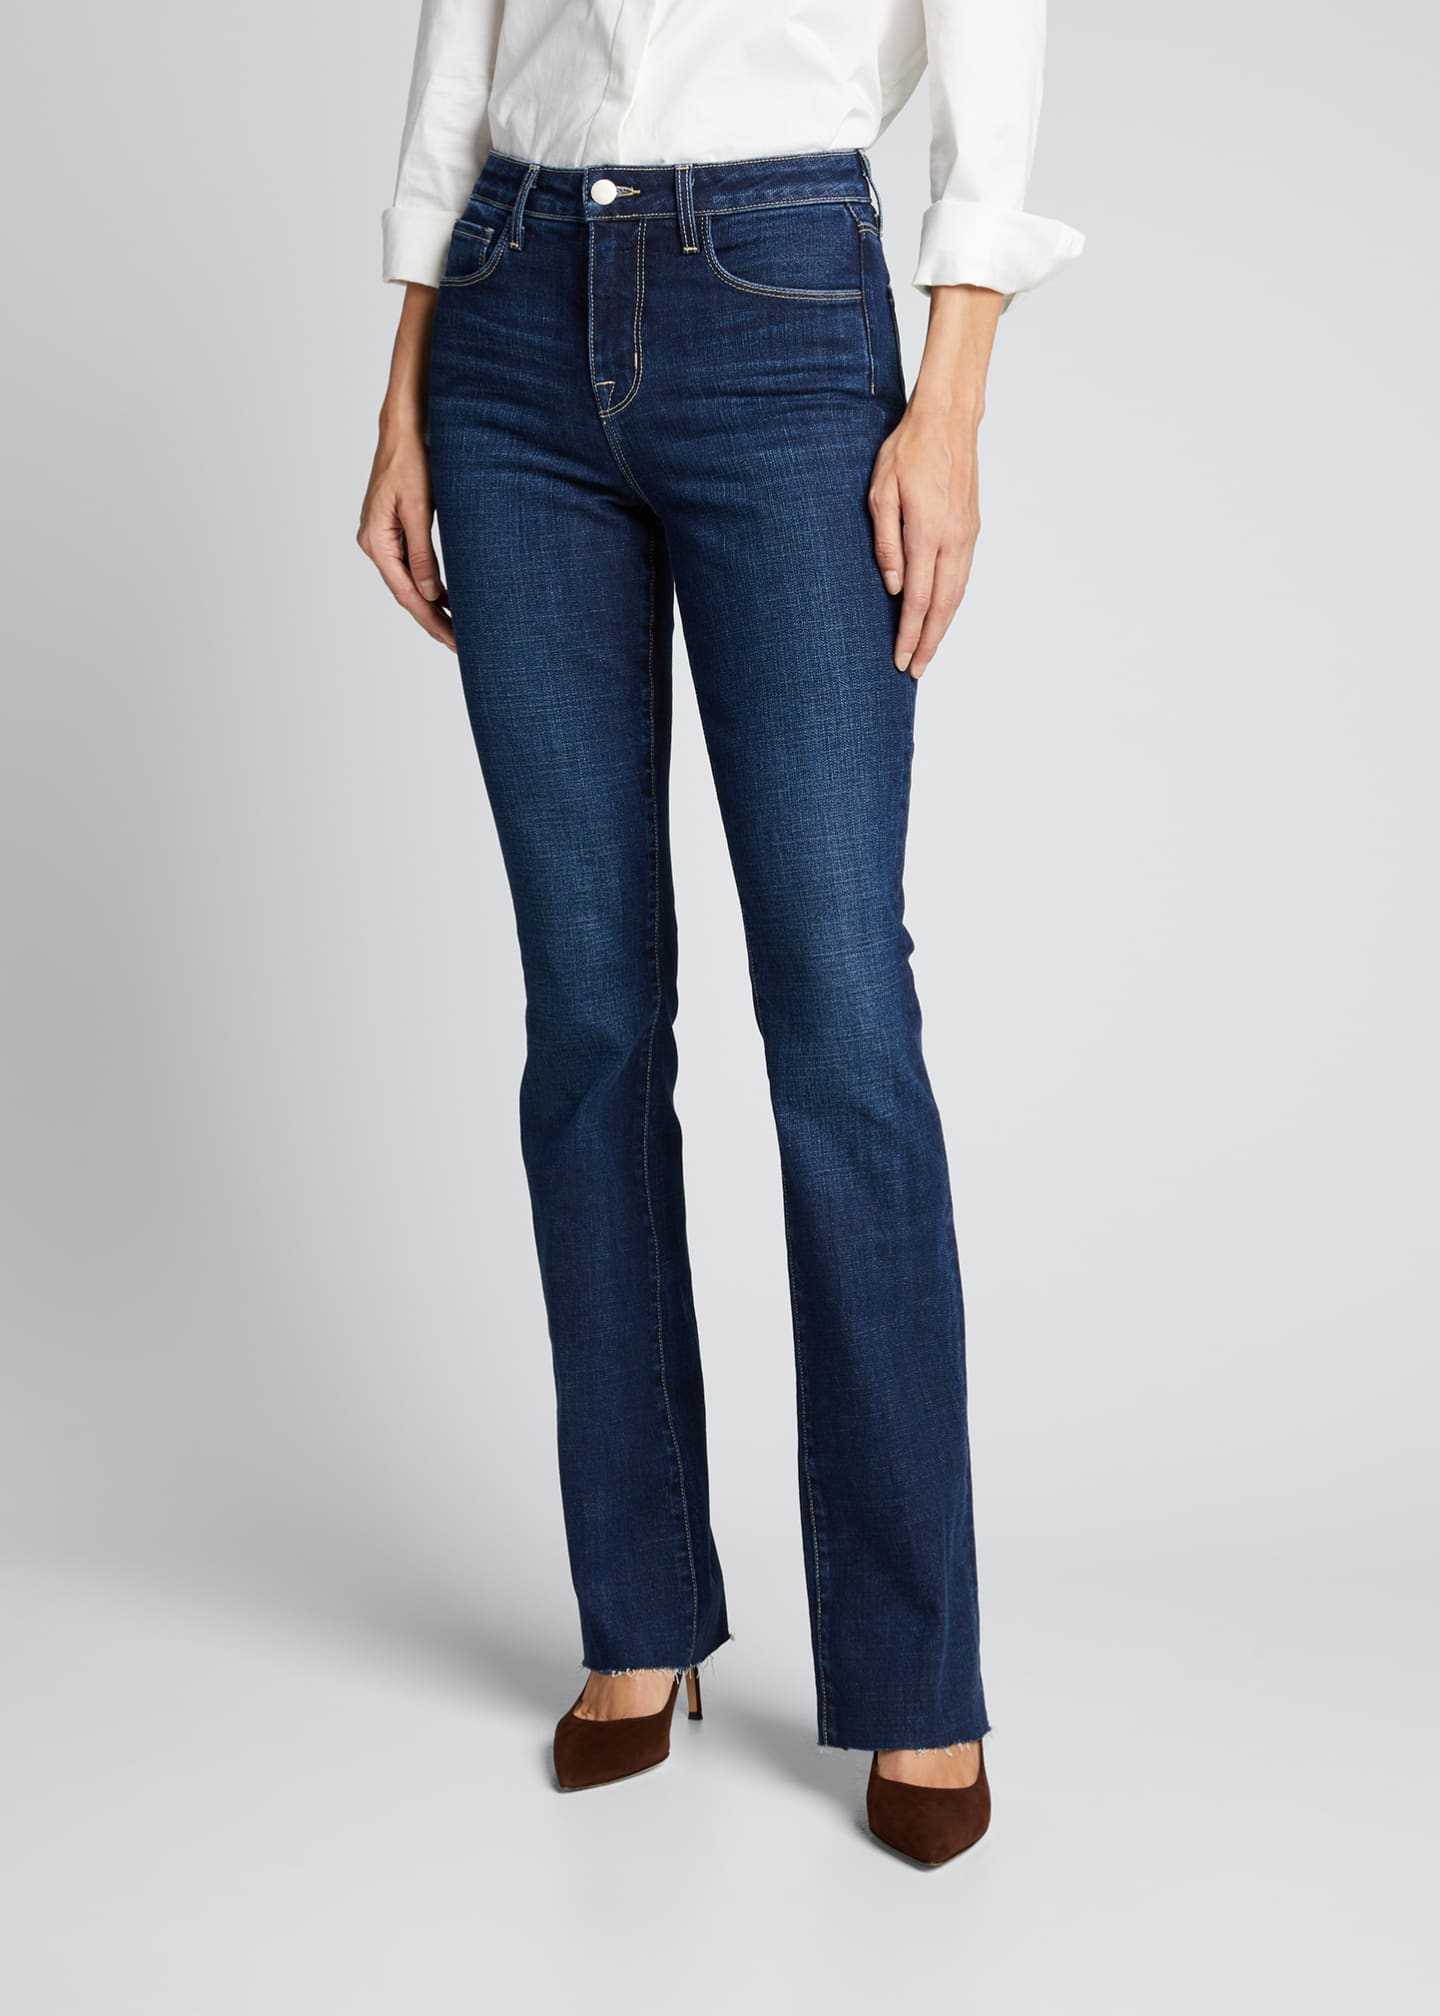 L'Agence Ruth High-Rise Straight Jeans - Bergdorf Goodman